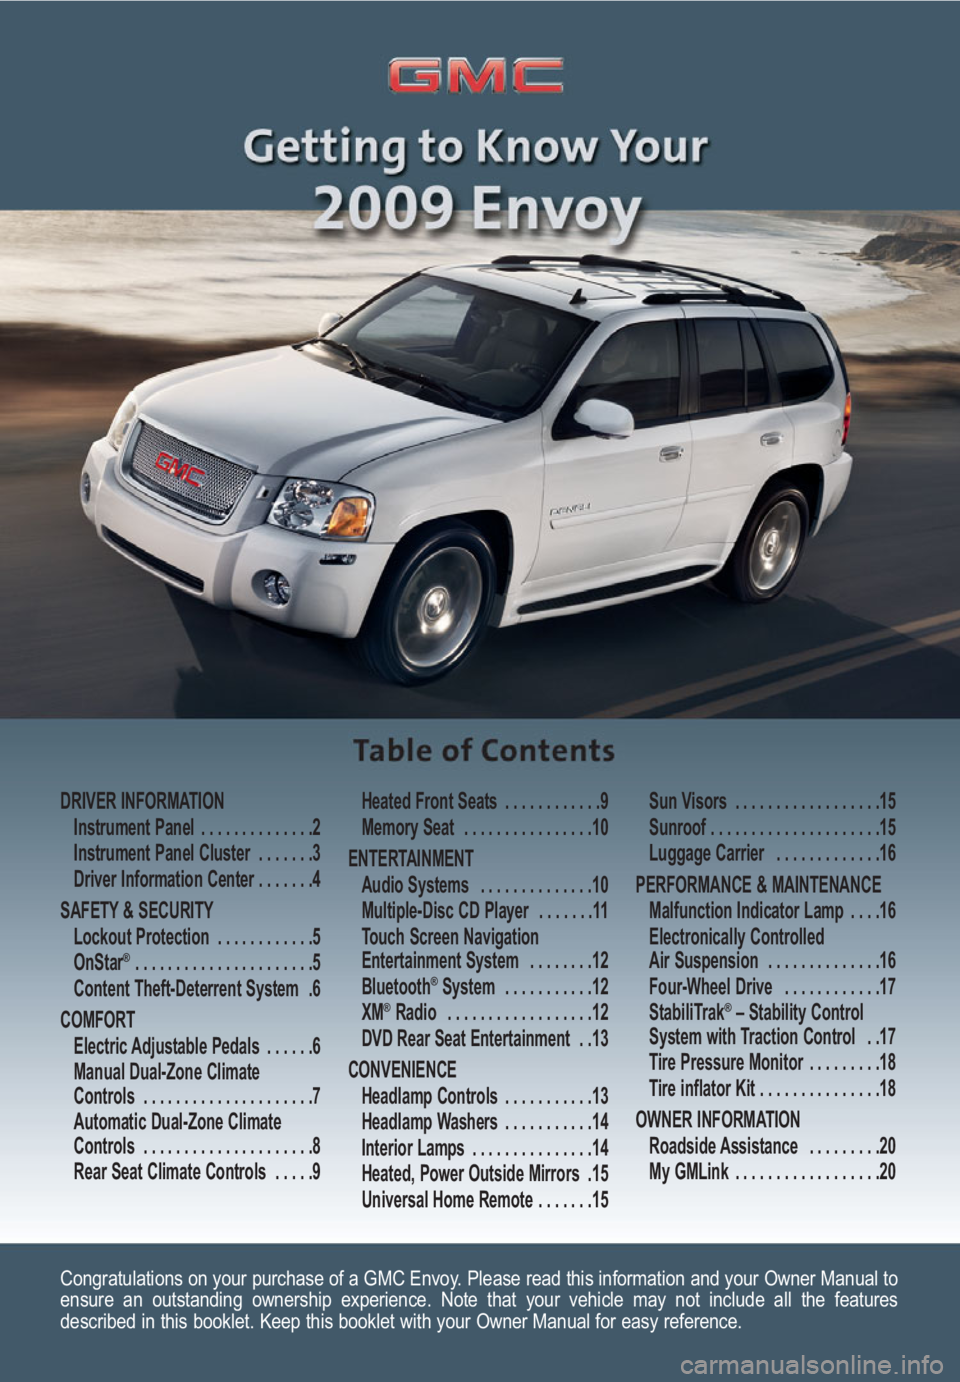 GMC ENVOY 2009  Get To Know Guide Congratulations on your purchase of a GMC Envoy. Please read this information and your Owner Manual to
ensure an outstanding ownership experience. Note that your vehicle may not include all the featur